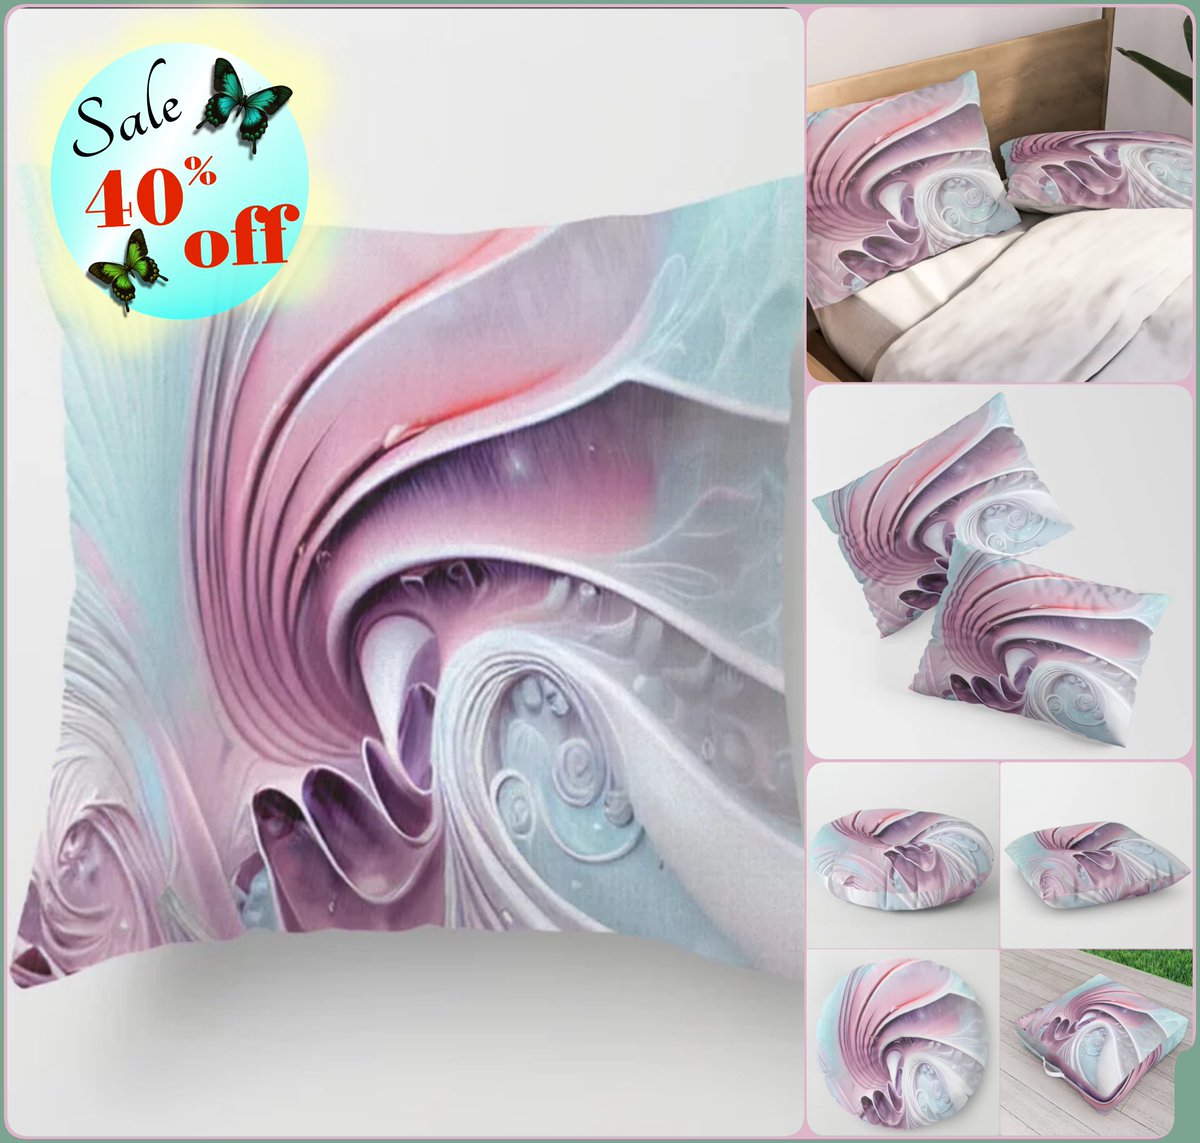 *SALE 40% Off*Today*
Yolo Quasar Throw Pillow~by Art Falaxy~
~Unique Pillows!~
#artfalaxy #art #bedroom #pillows #homedecor #society6 #Society6max #swirls #modern #trendy #accessories #accents #floorpillows #pillows #shams #blankets

society6.com/product/yolo-q…
COLLECTION:…